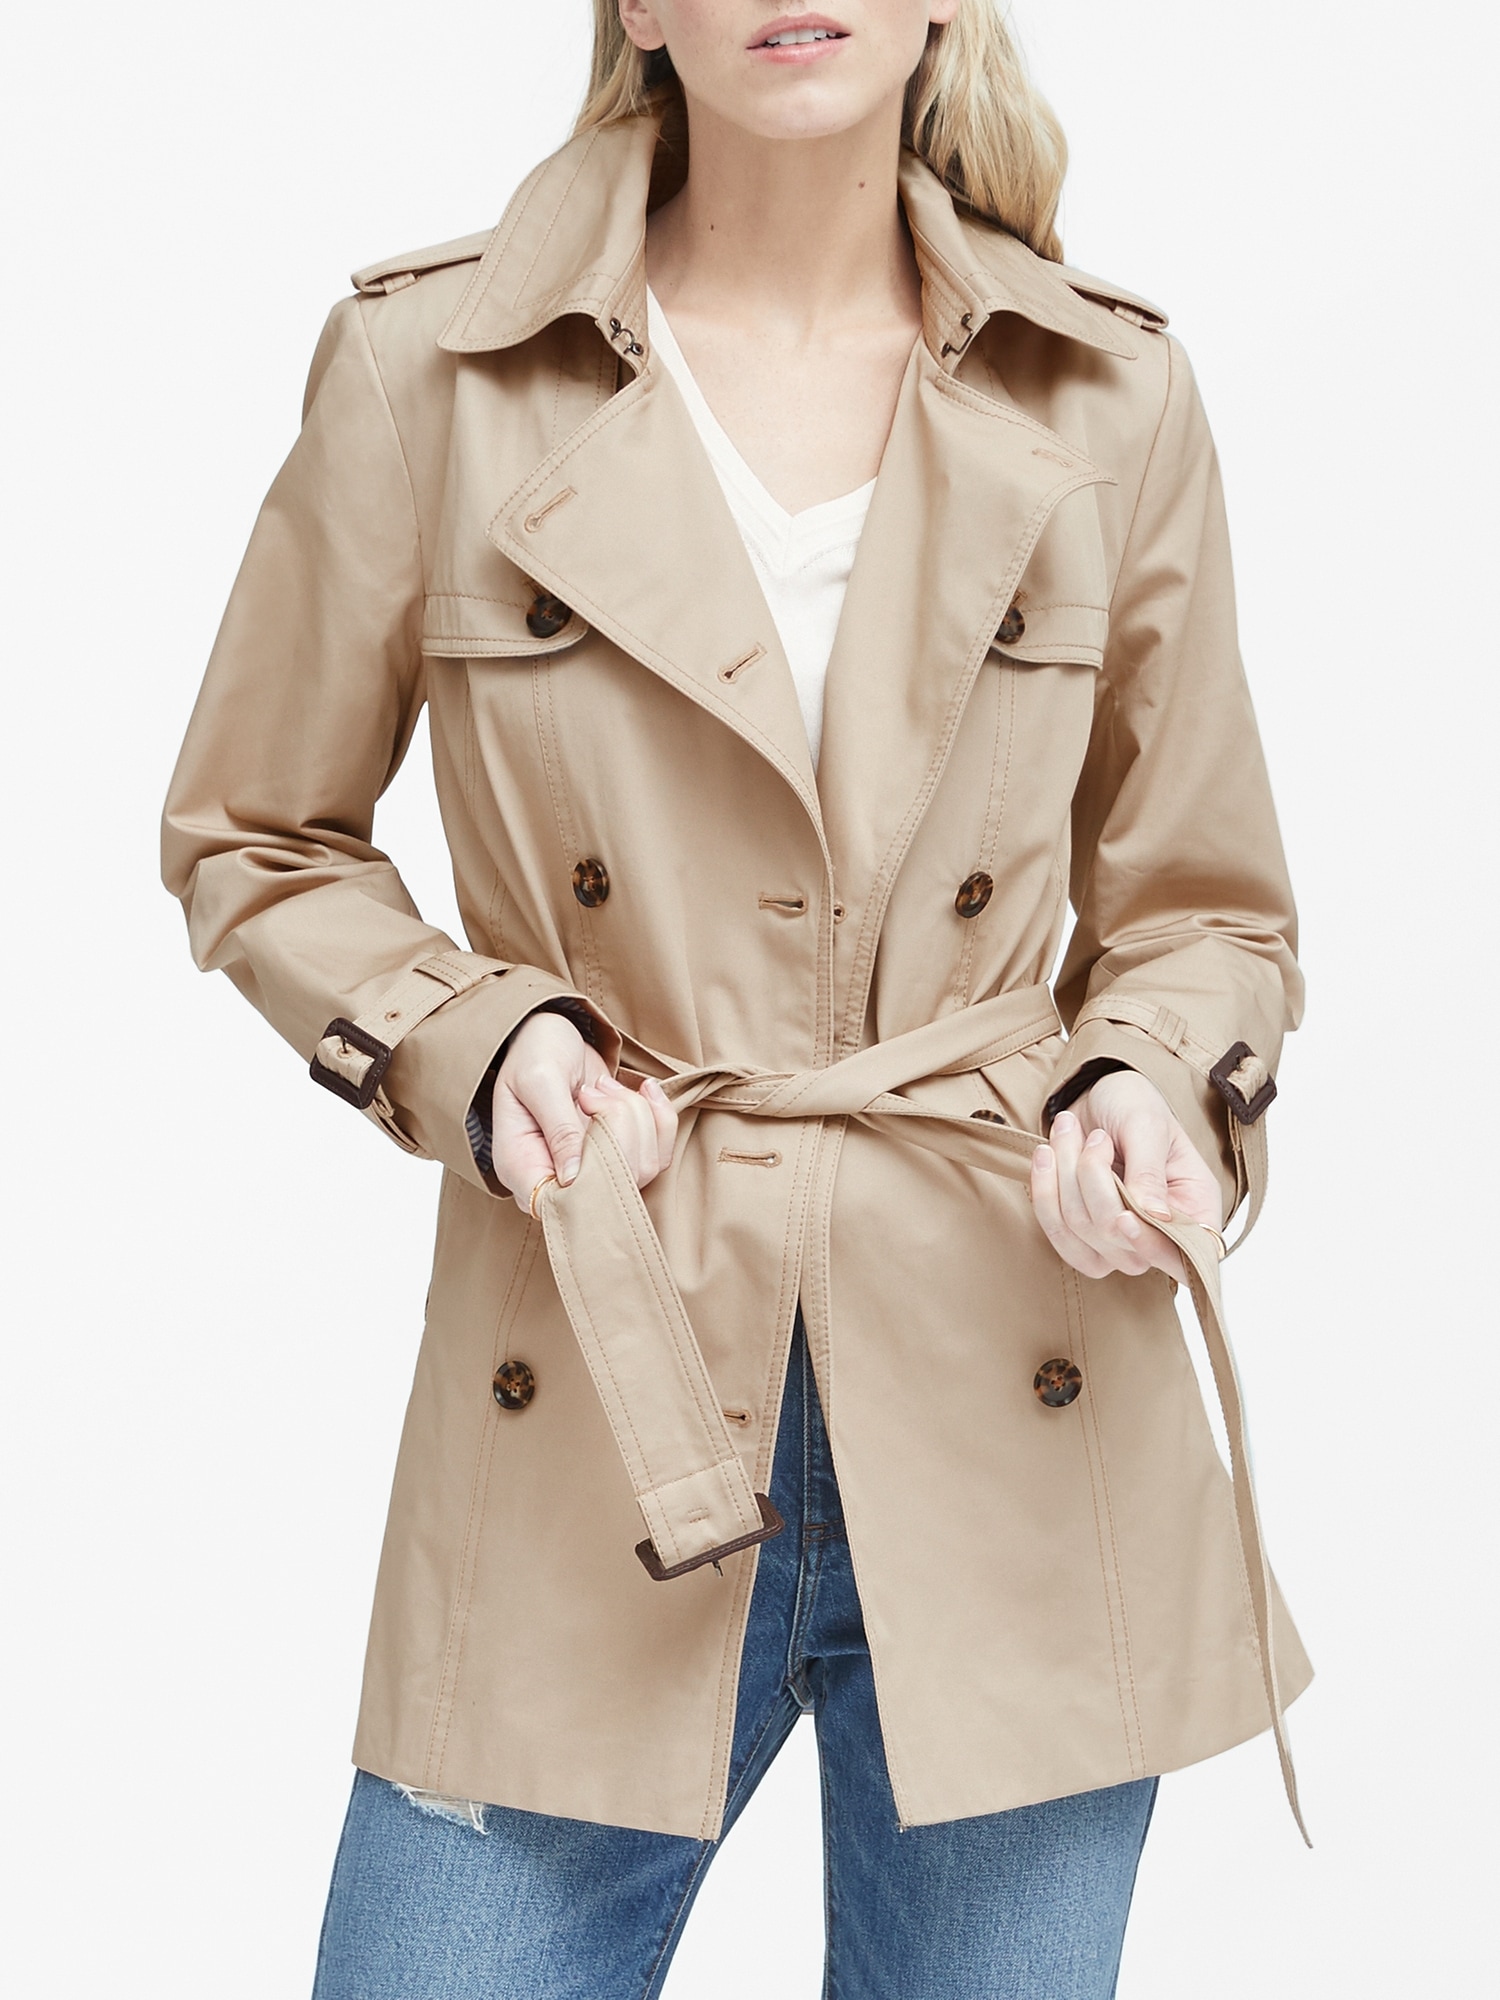 Short Trench Coat for Women with Double Breast Button Closure